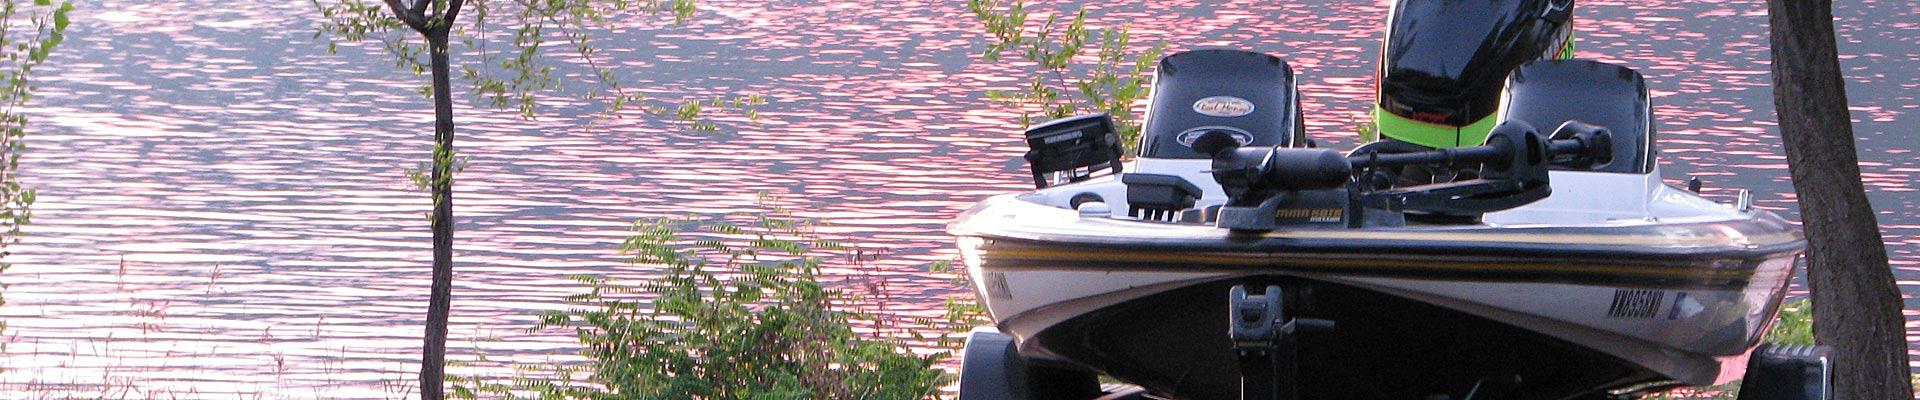 Boating Pre-Trip Checklist  The Ultimate Bass Fishing Resource